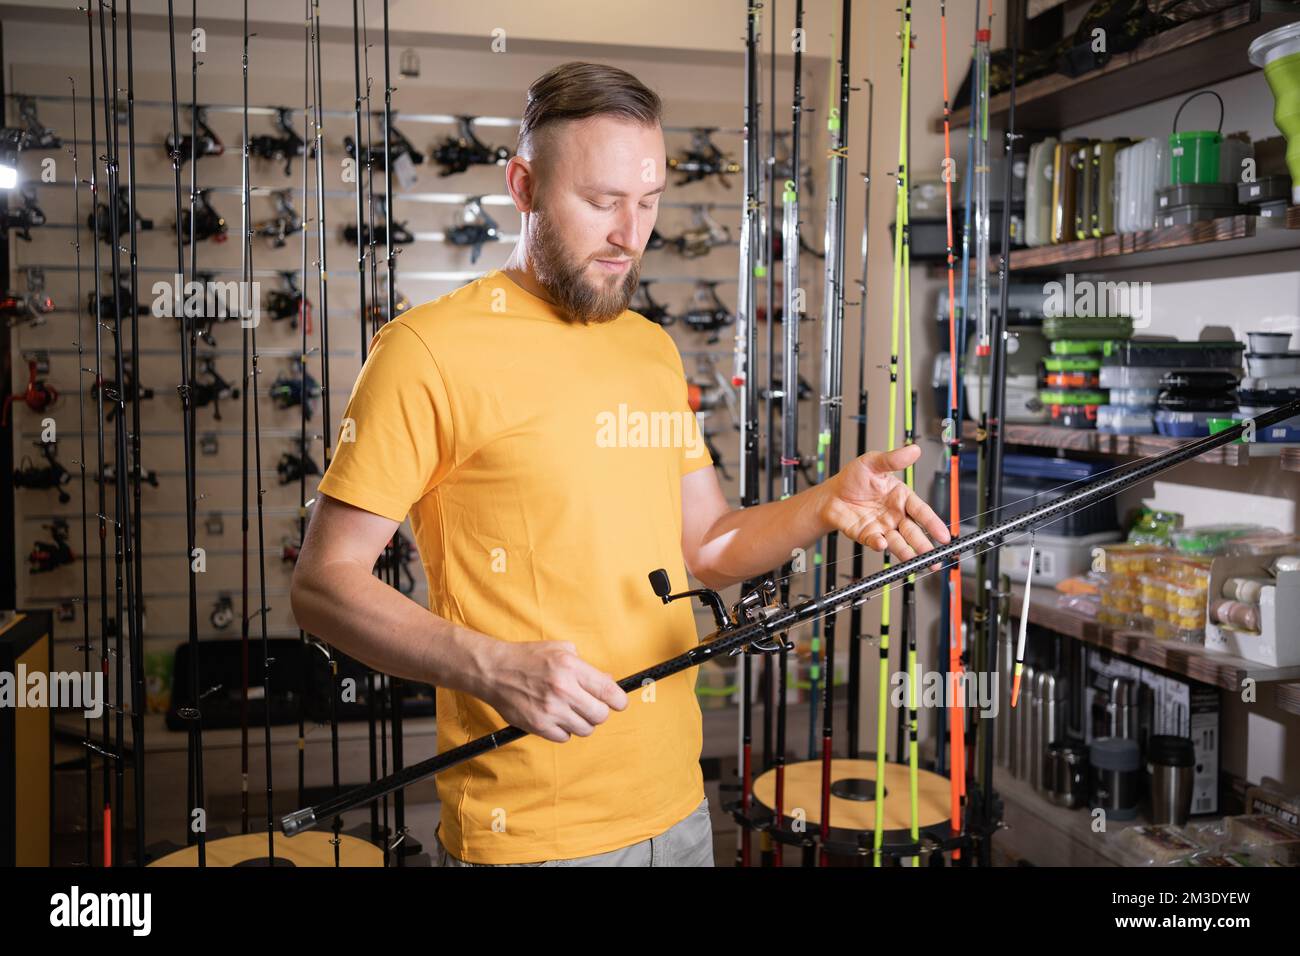 Man chooses fishing rod in sports shop, copy space Stock Photo